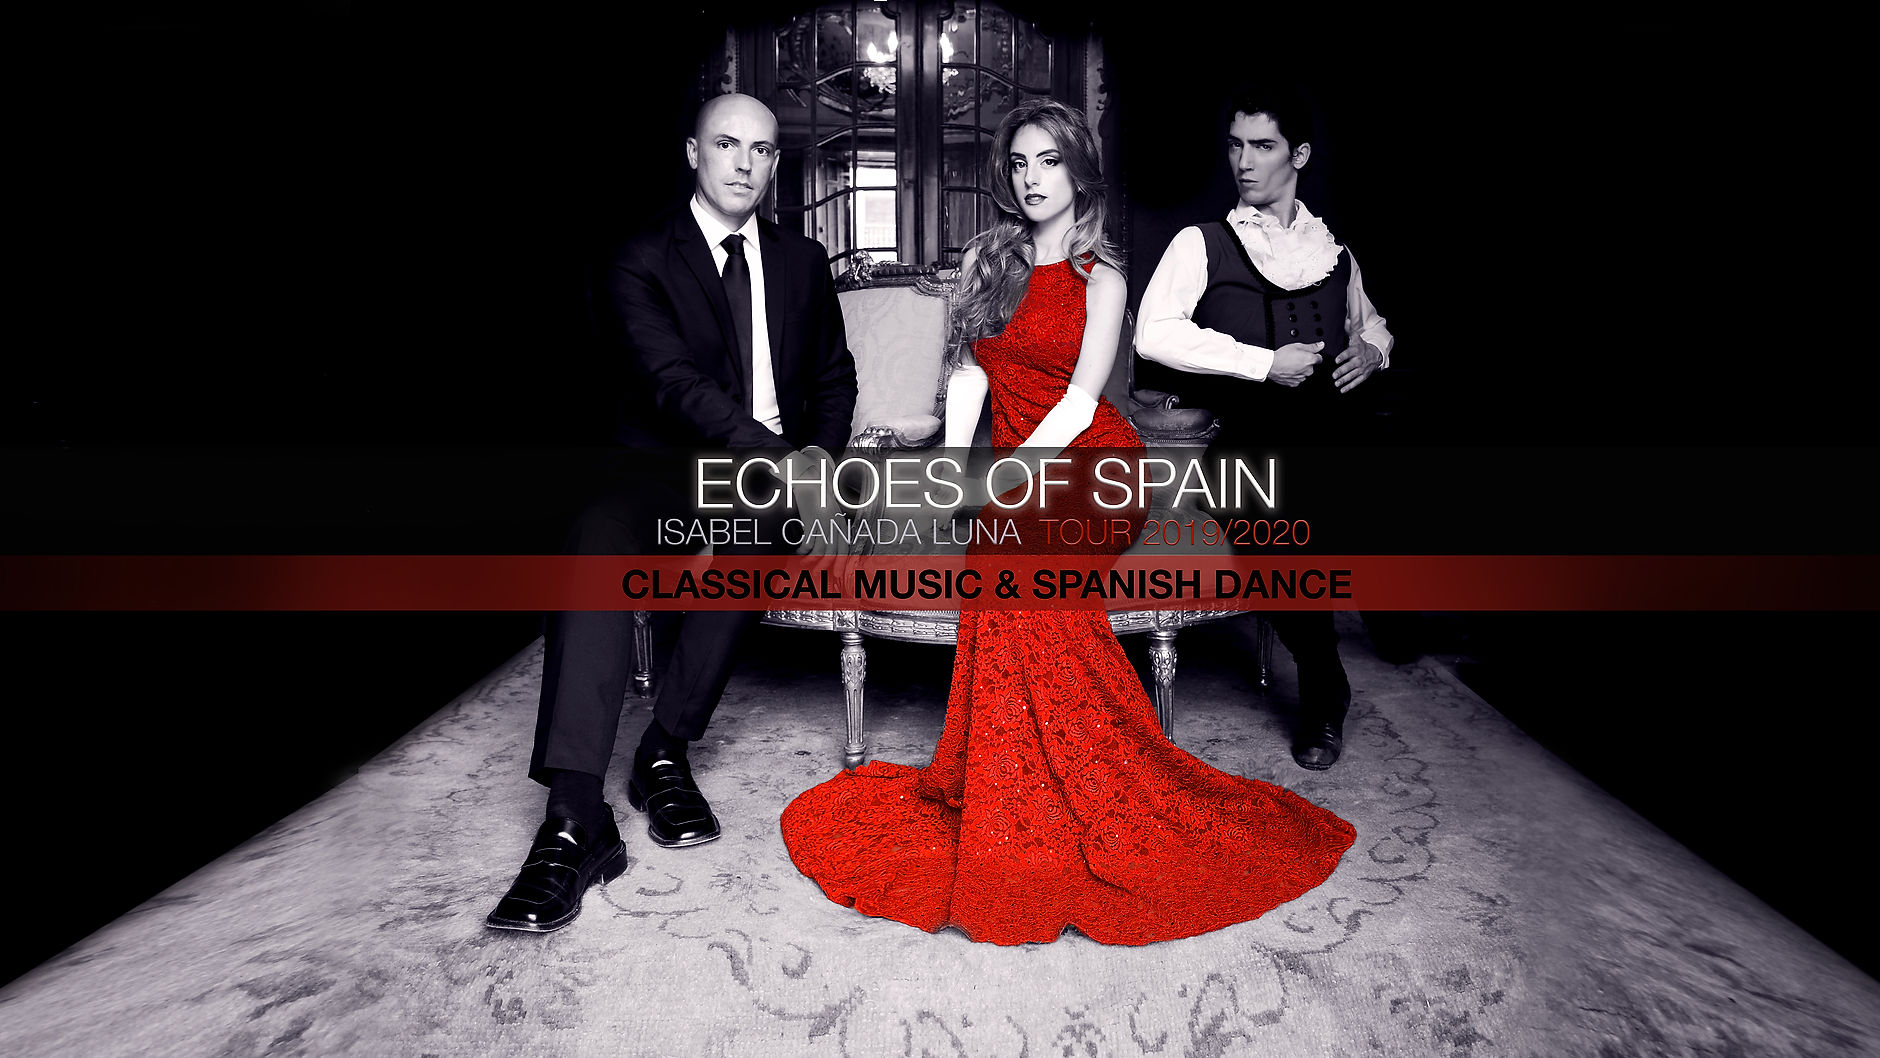 ECHOES OF SPAIN